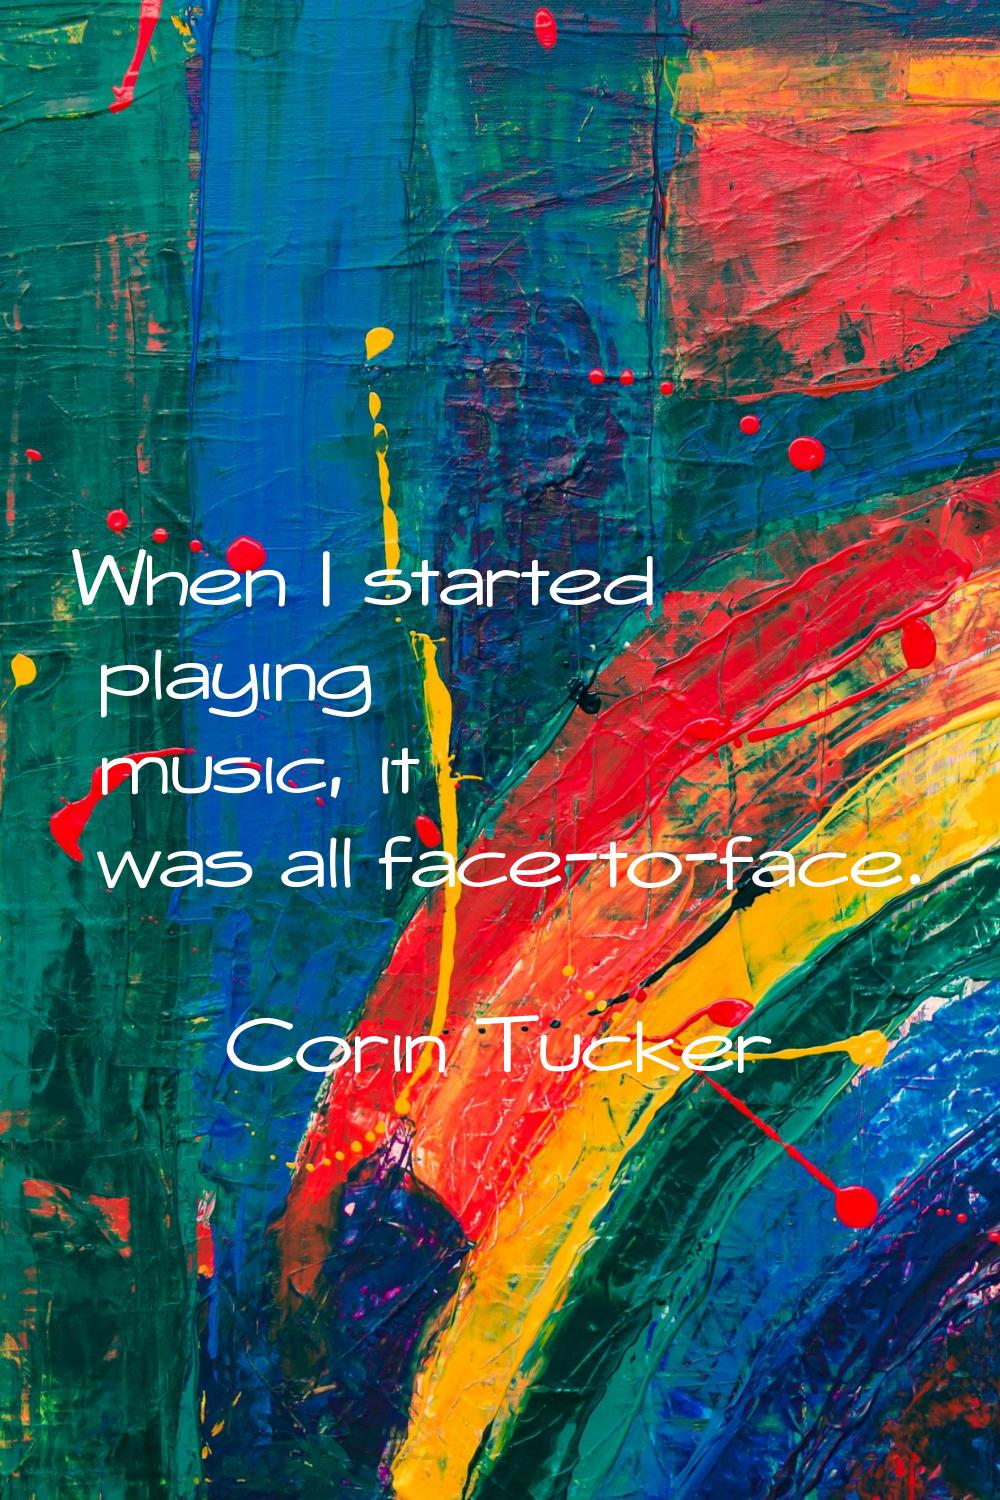 When I started playing music, it was all face-to-face.